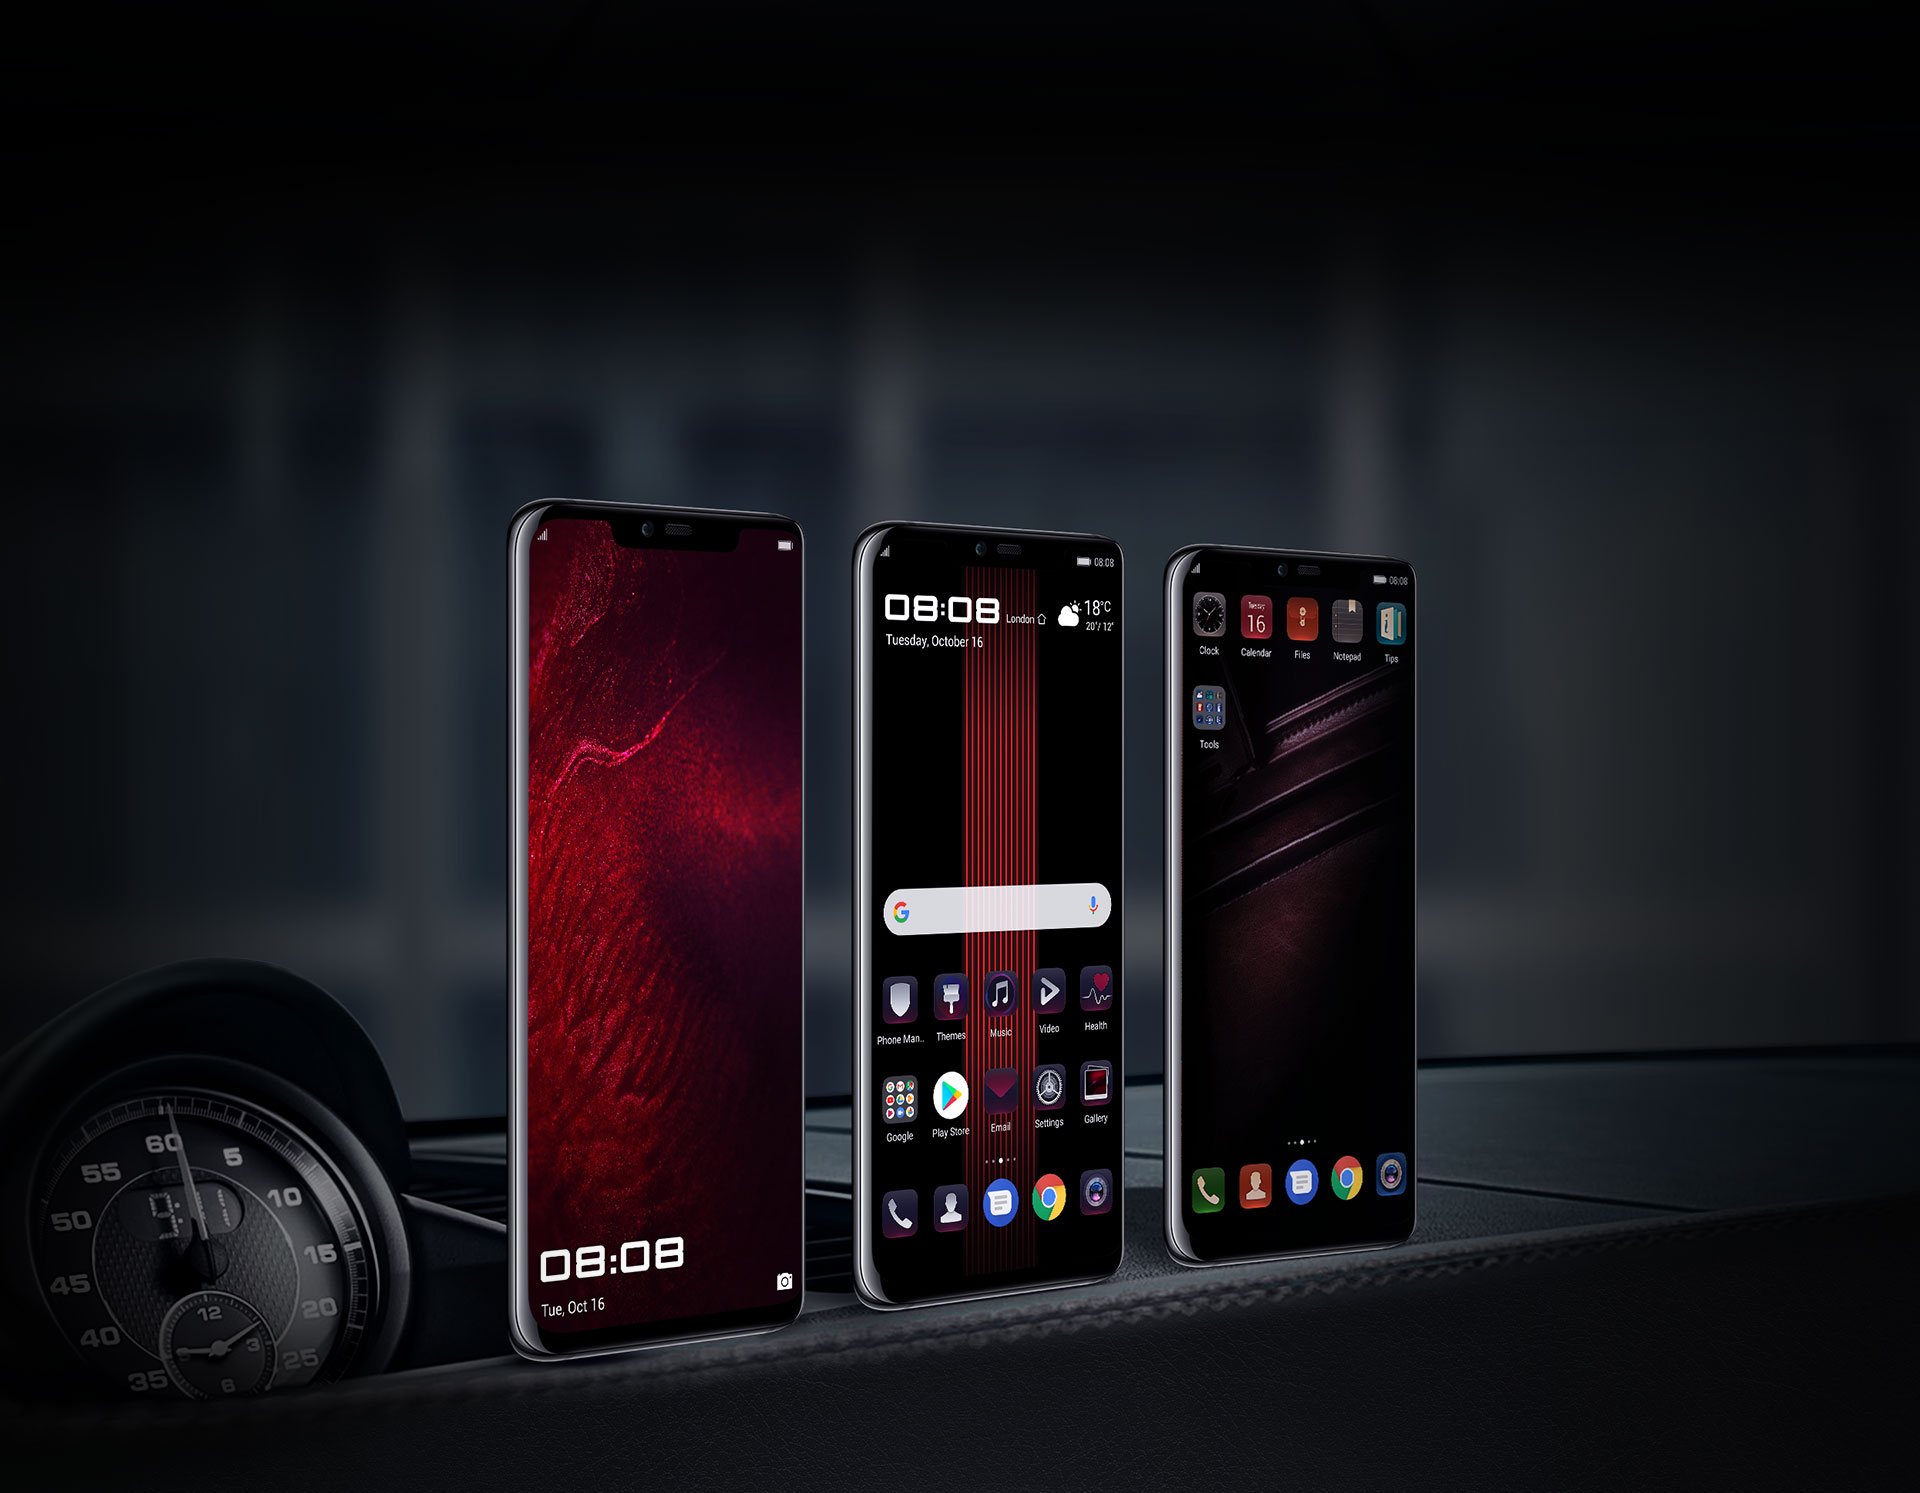 Three different customised UI for wallpaper for PORSCHE DESIGN HUAWEI Mate 20 RS